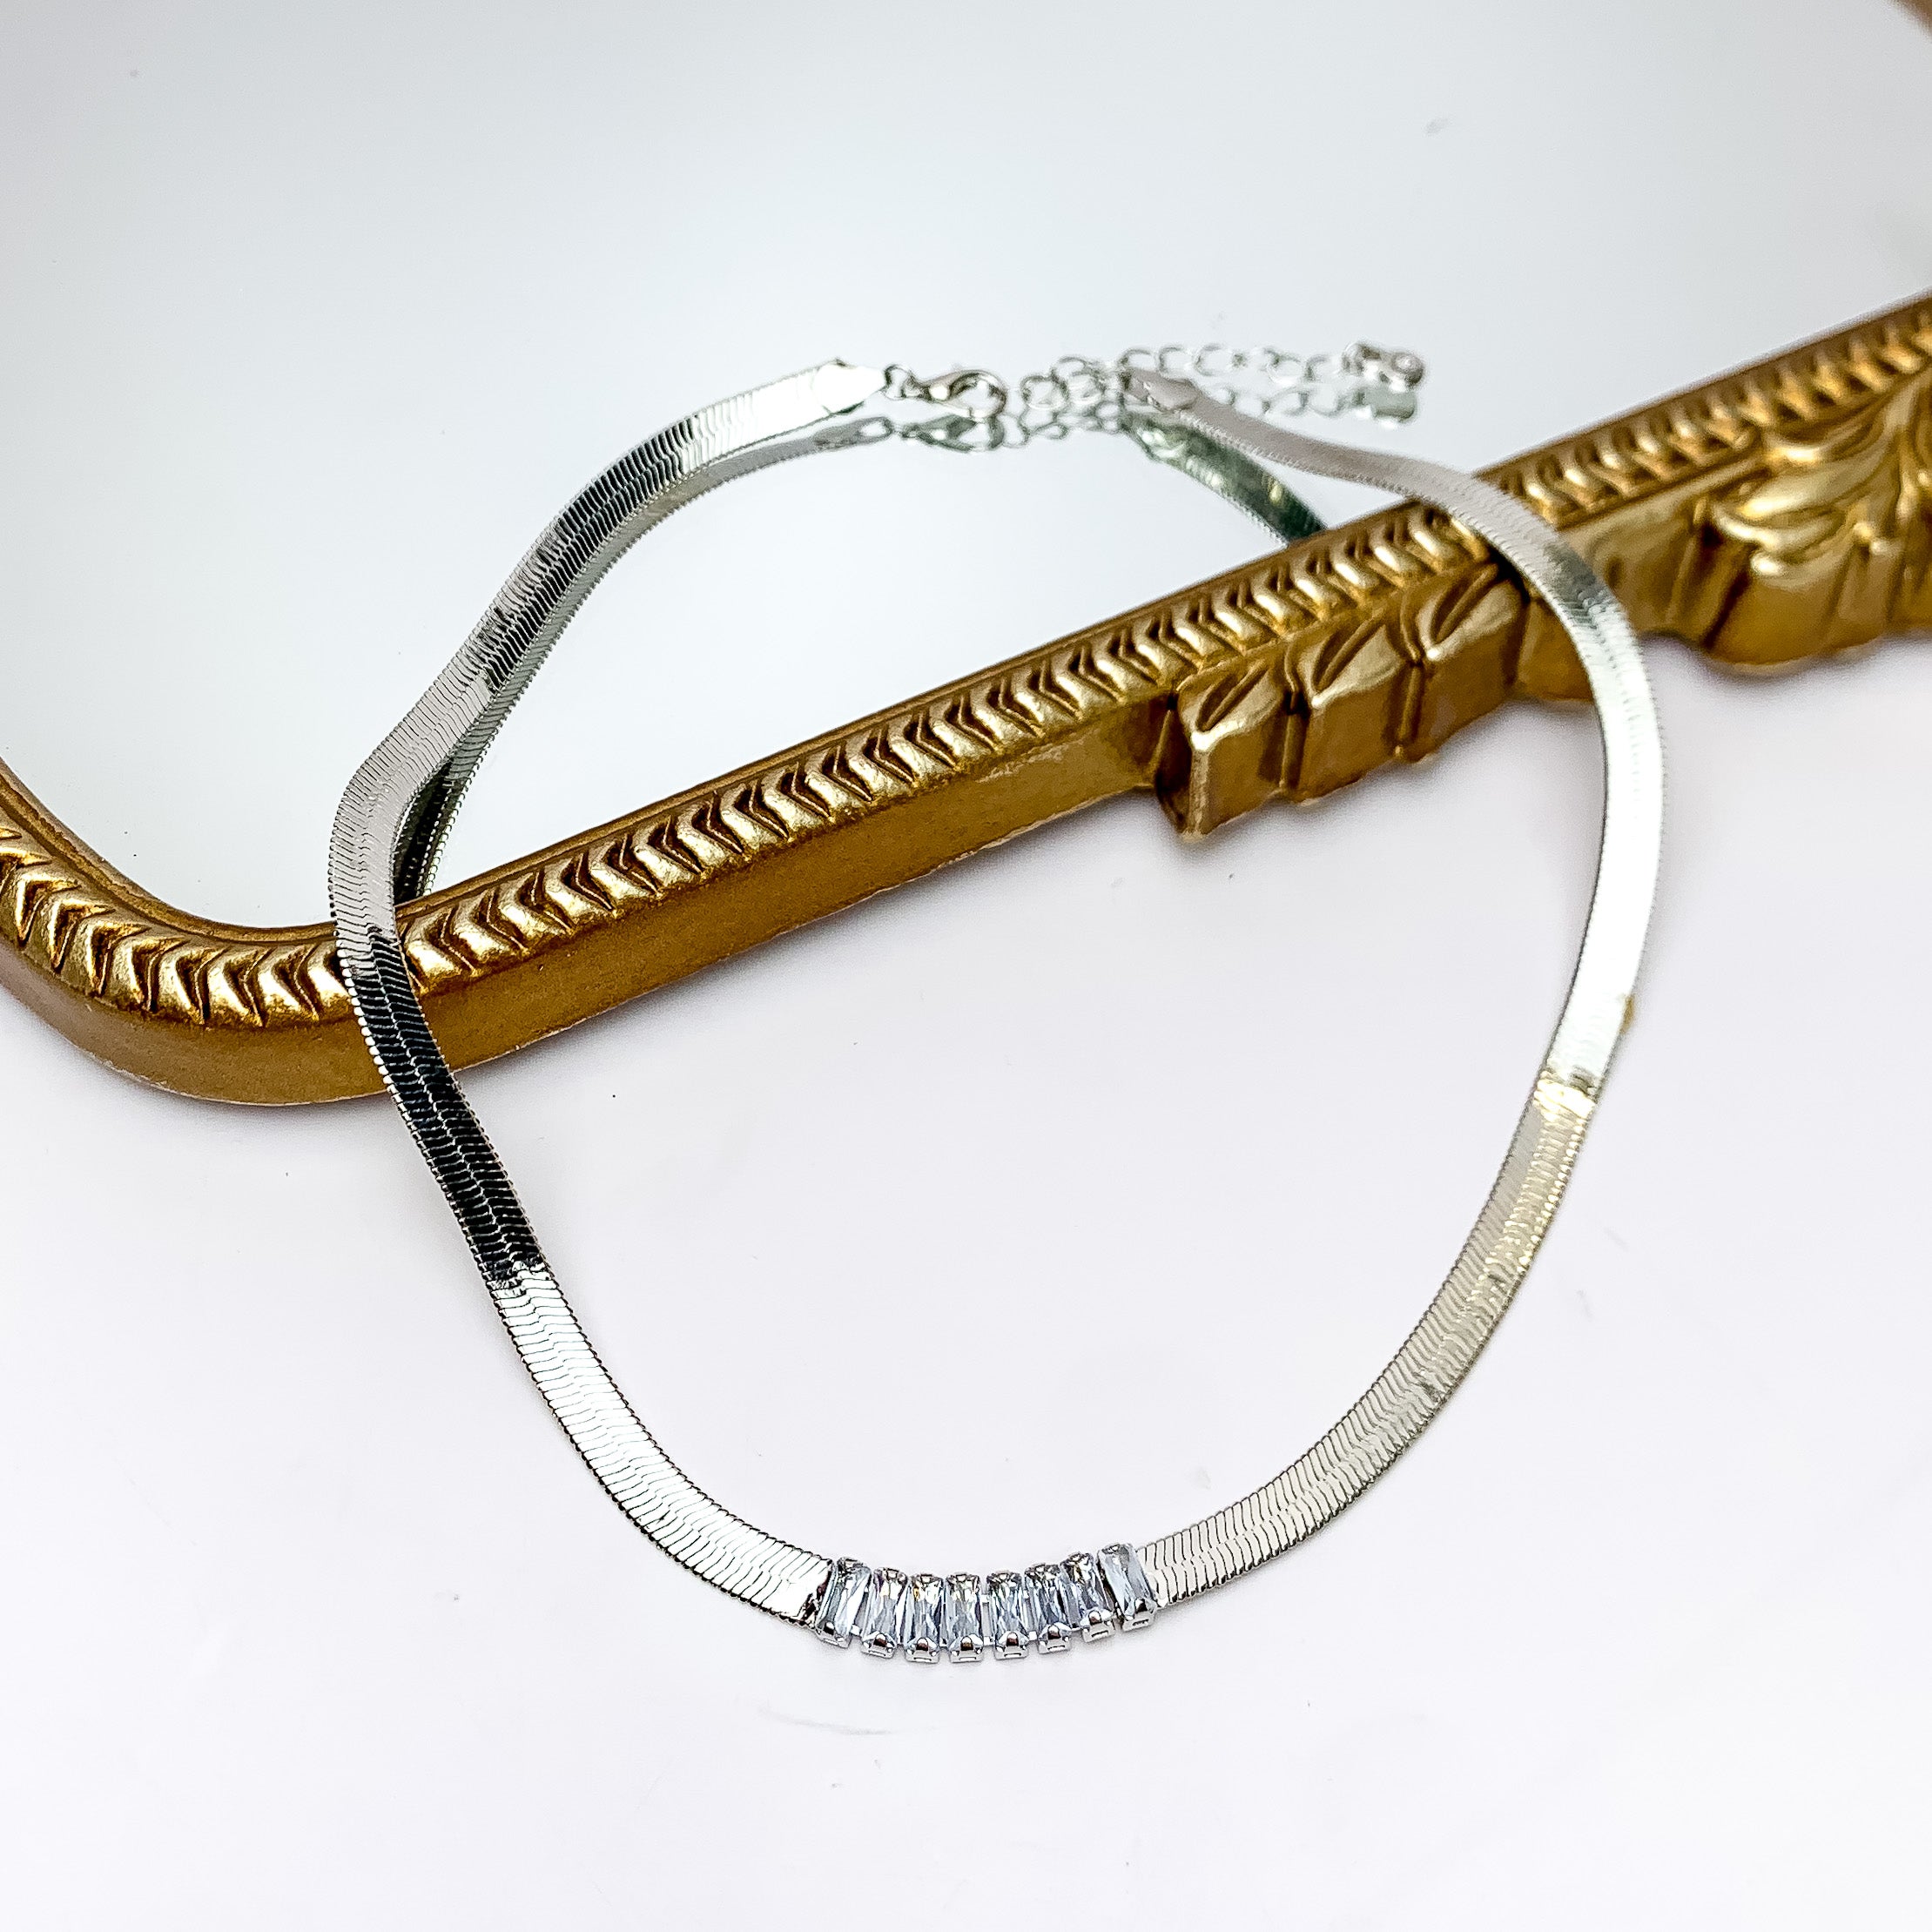 Silver Tone Chain Necklace With Rectangle Clear Crystals. Pictured on a white background with the top part of the necklace on a gold trim mirror.